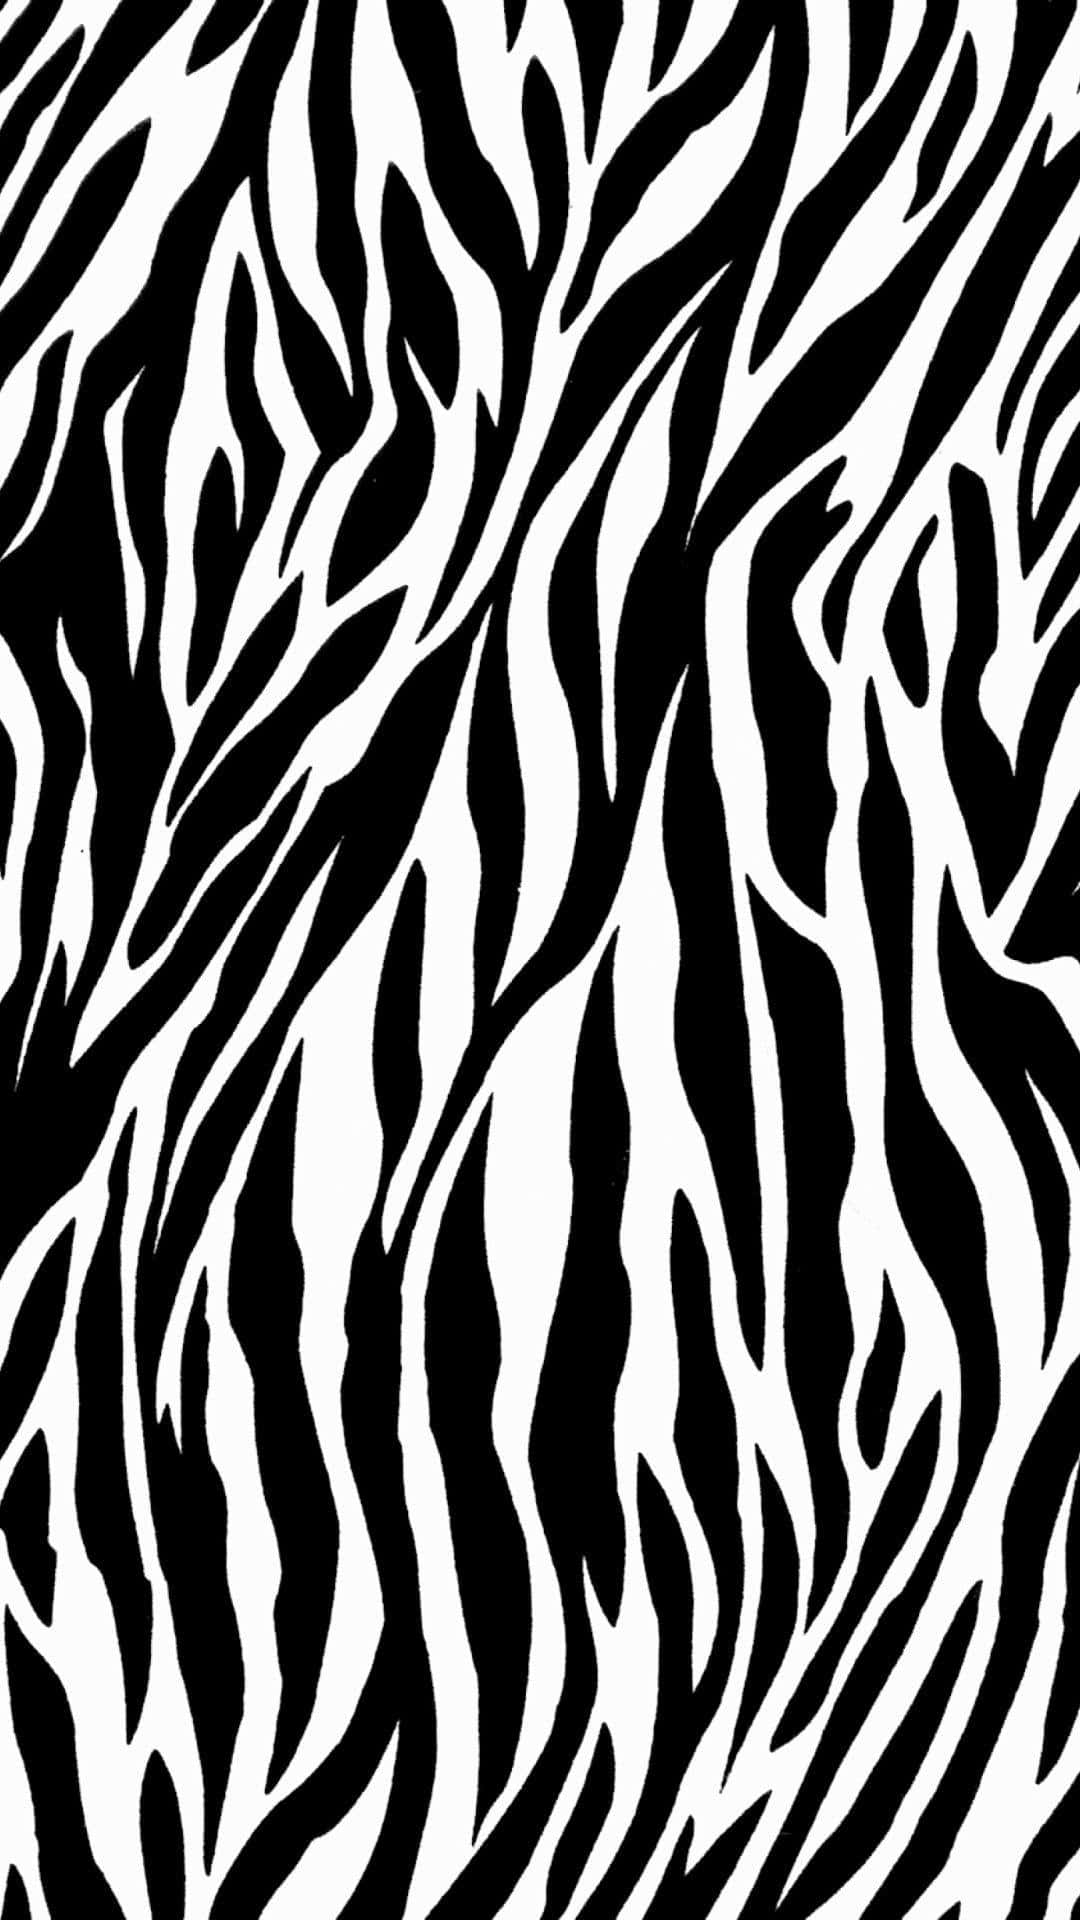 Spice up your look with this animal print iPhone! Wallpaper